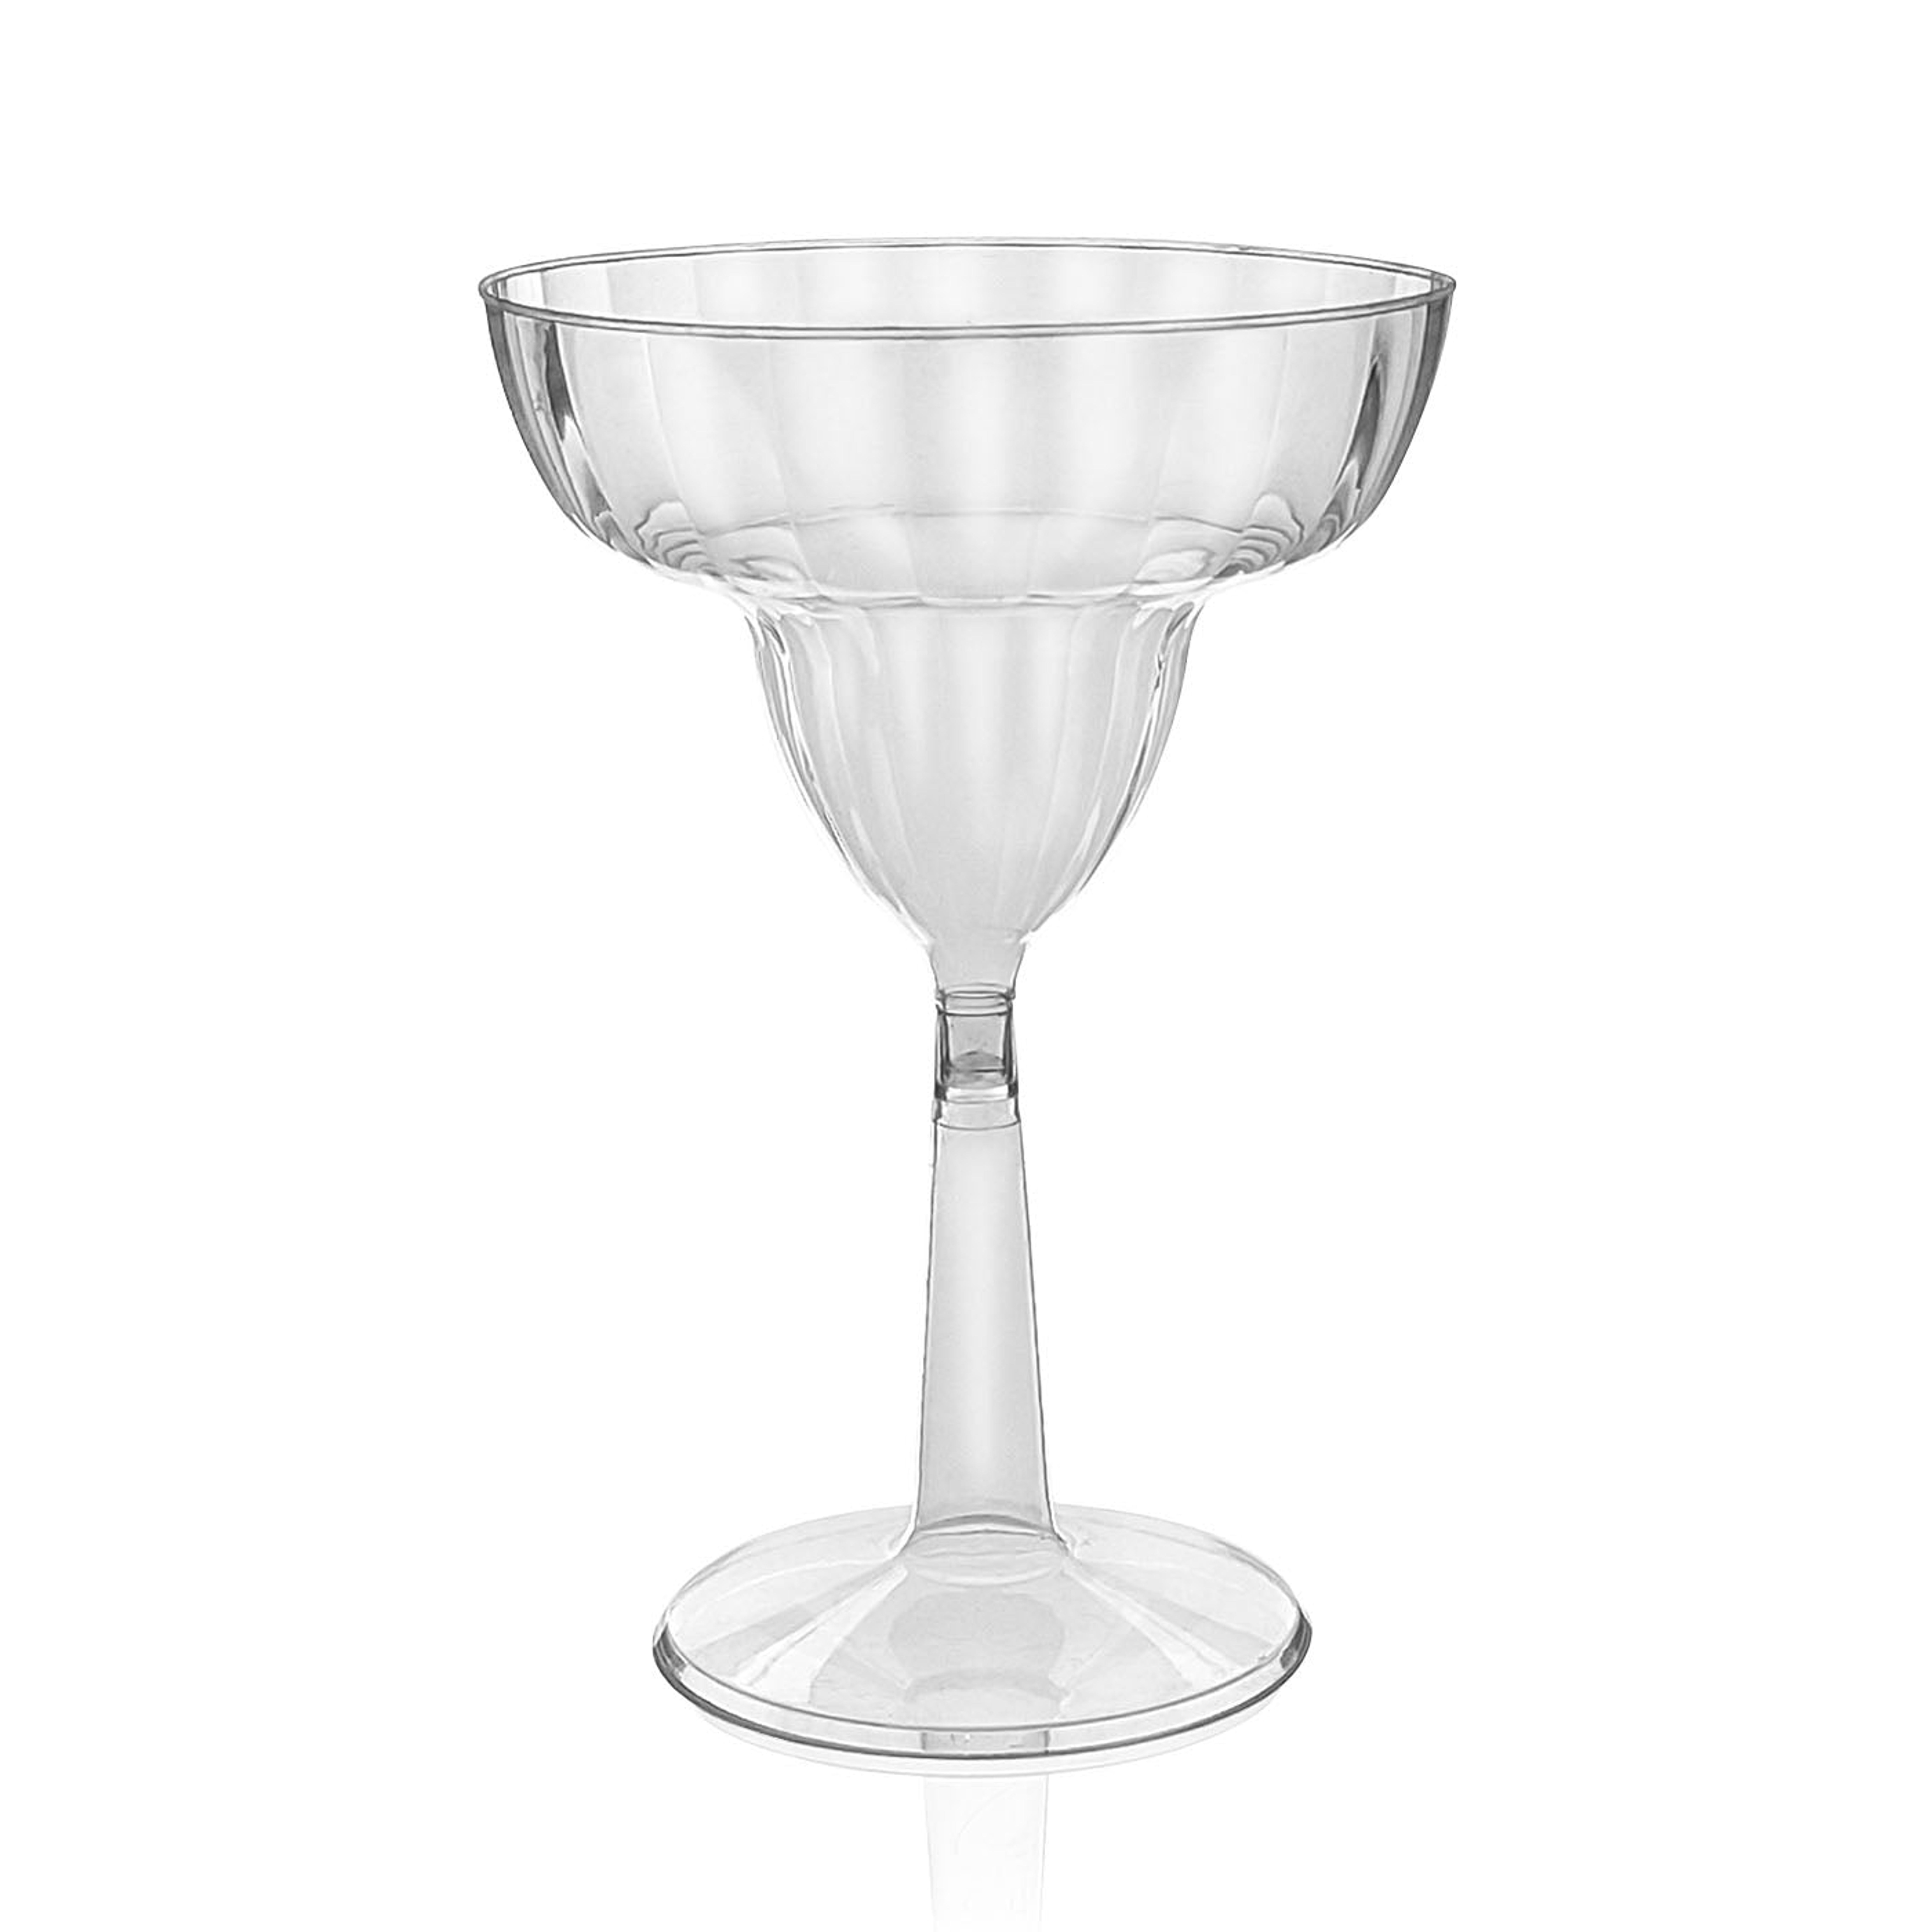 Birthday Parties & All Occasions 288 Pcs Disposable Hard Plastic Clear Martini Glasses Bulk Catering Party Cocktail Drinking Cups for Wedding Plastic Margarita Glasses 6 oz Margarita Glasses 